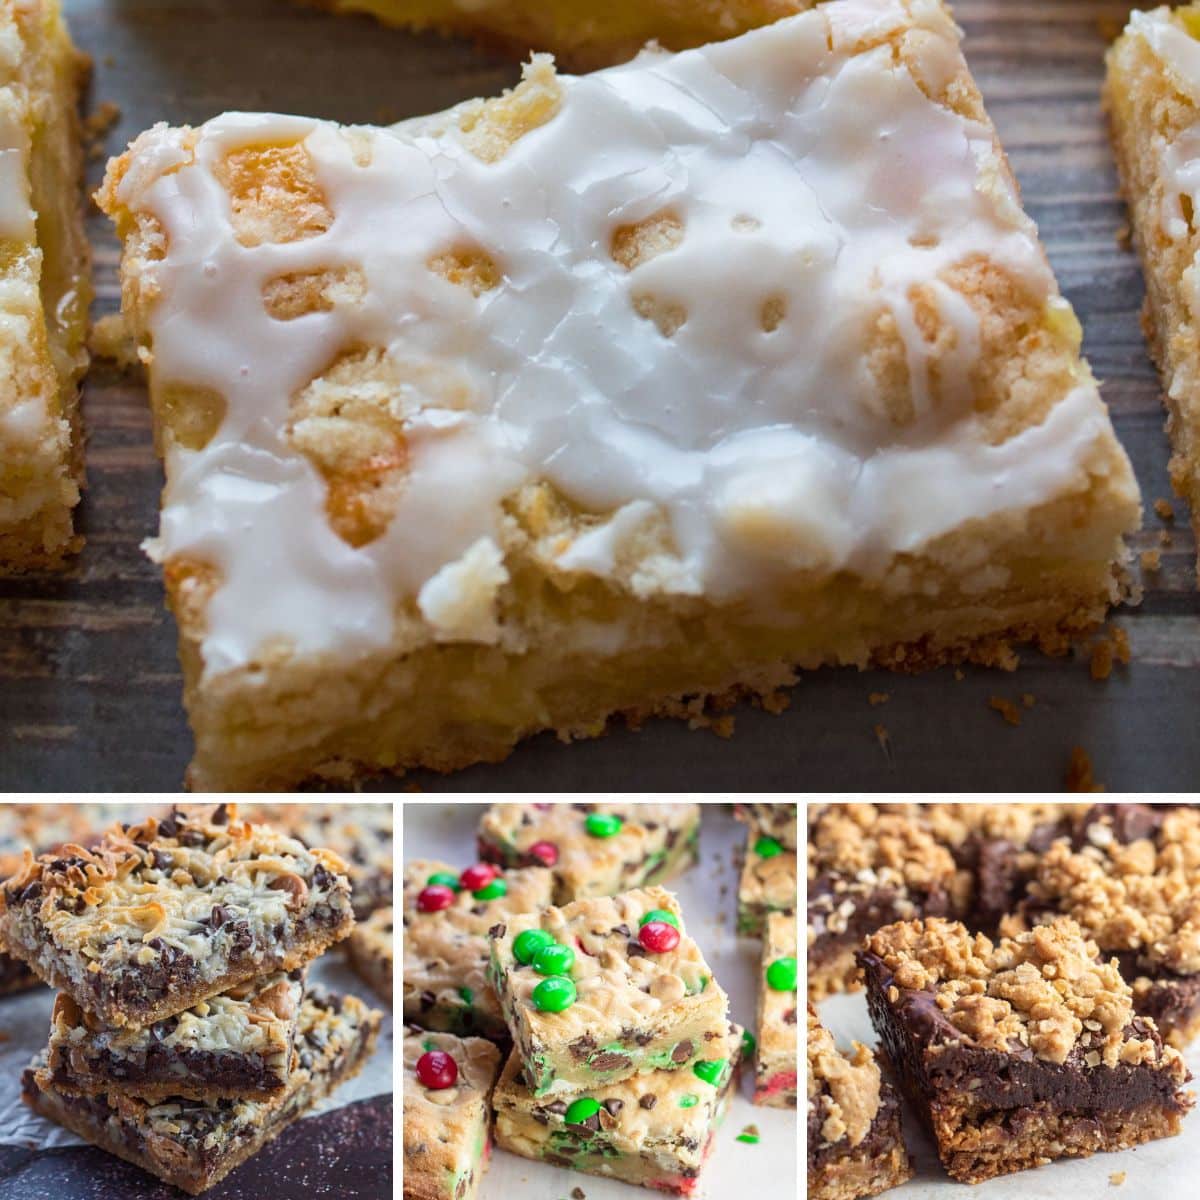 Best dessert bar recipes with 4 best ideas pictured in a collage.